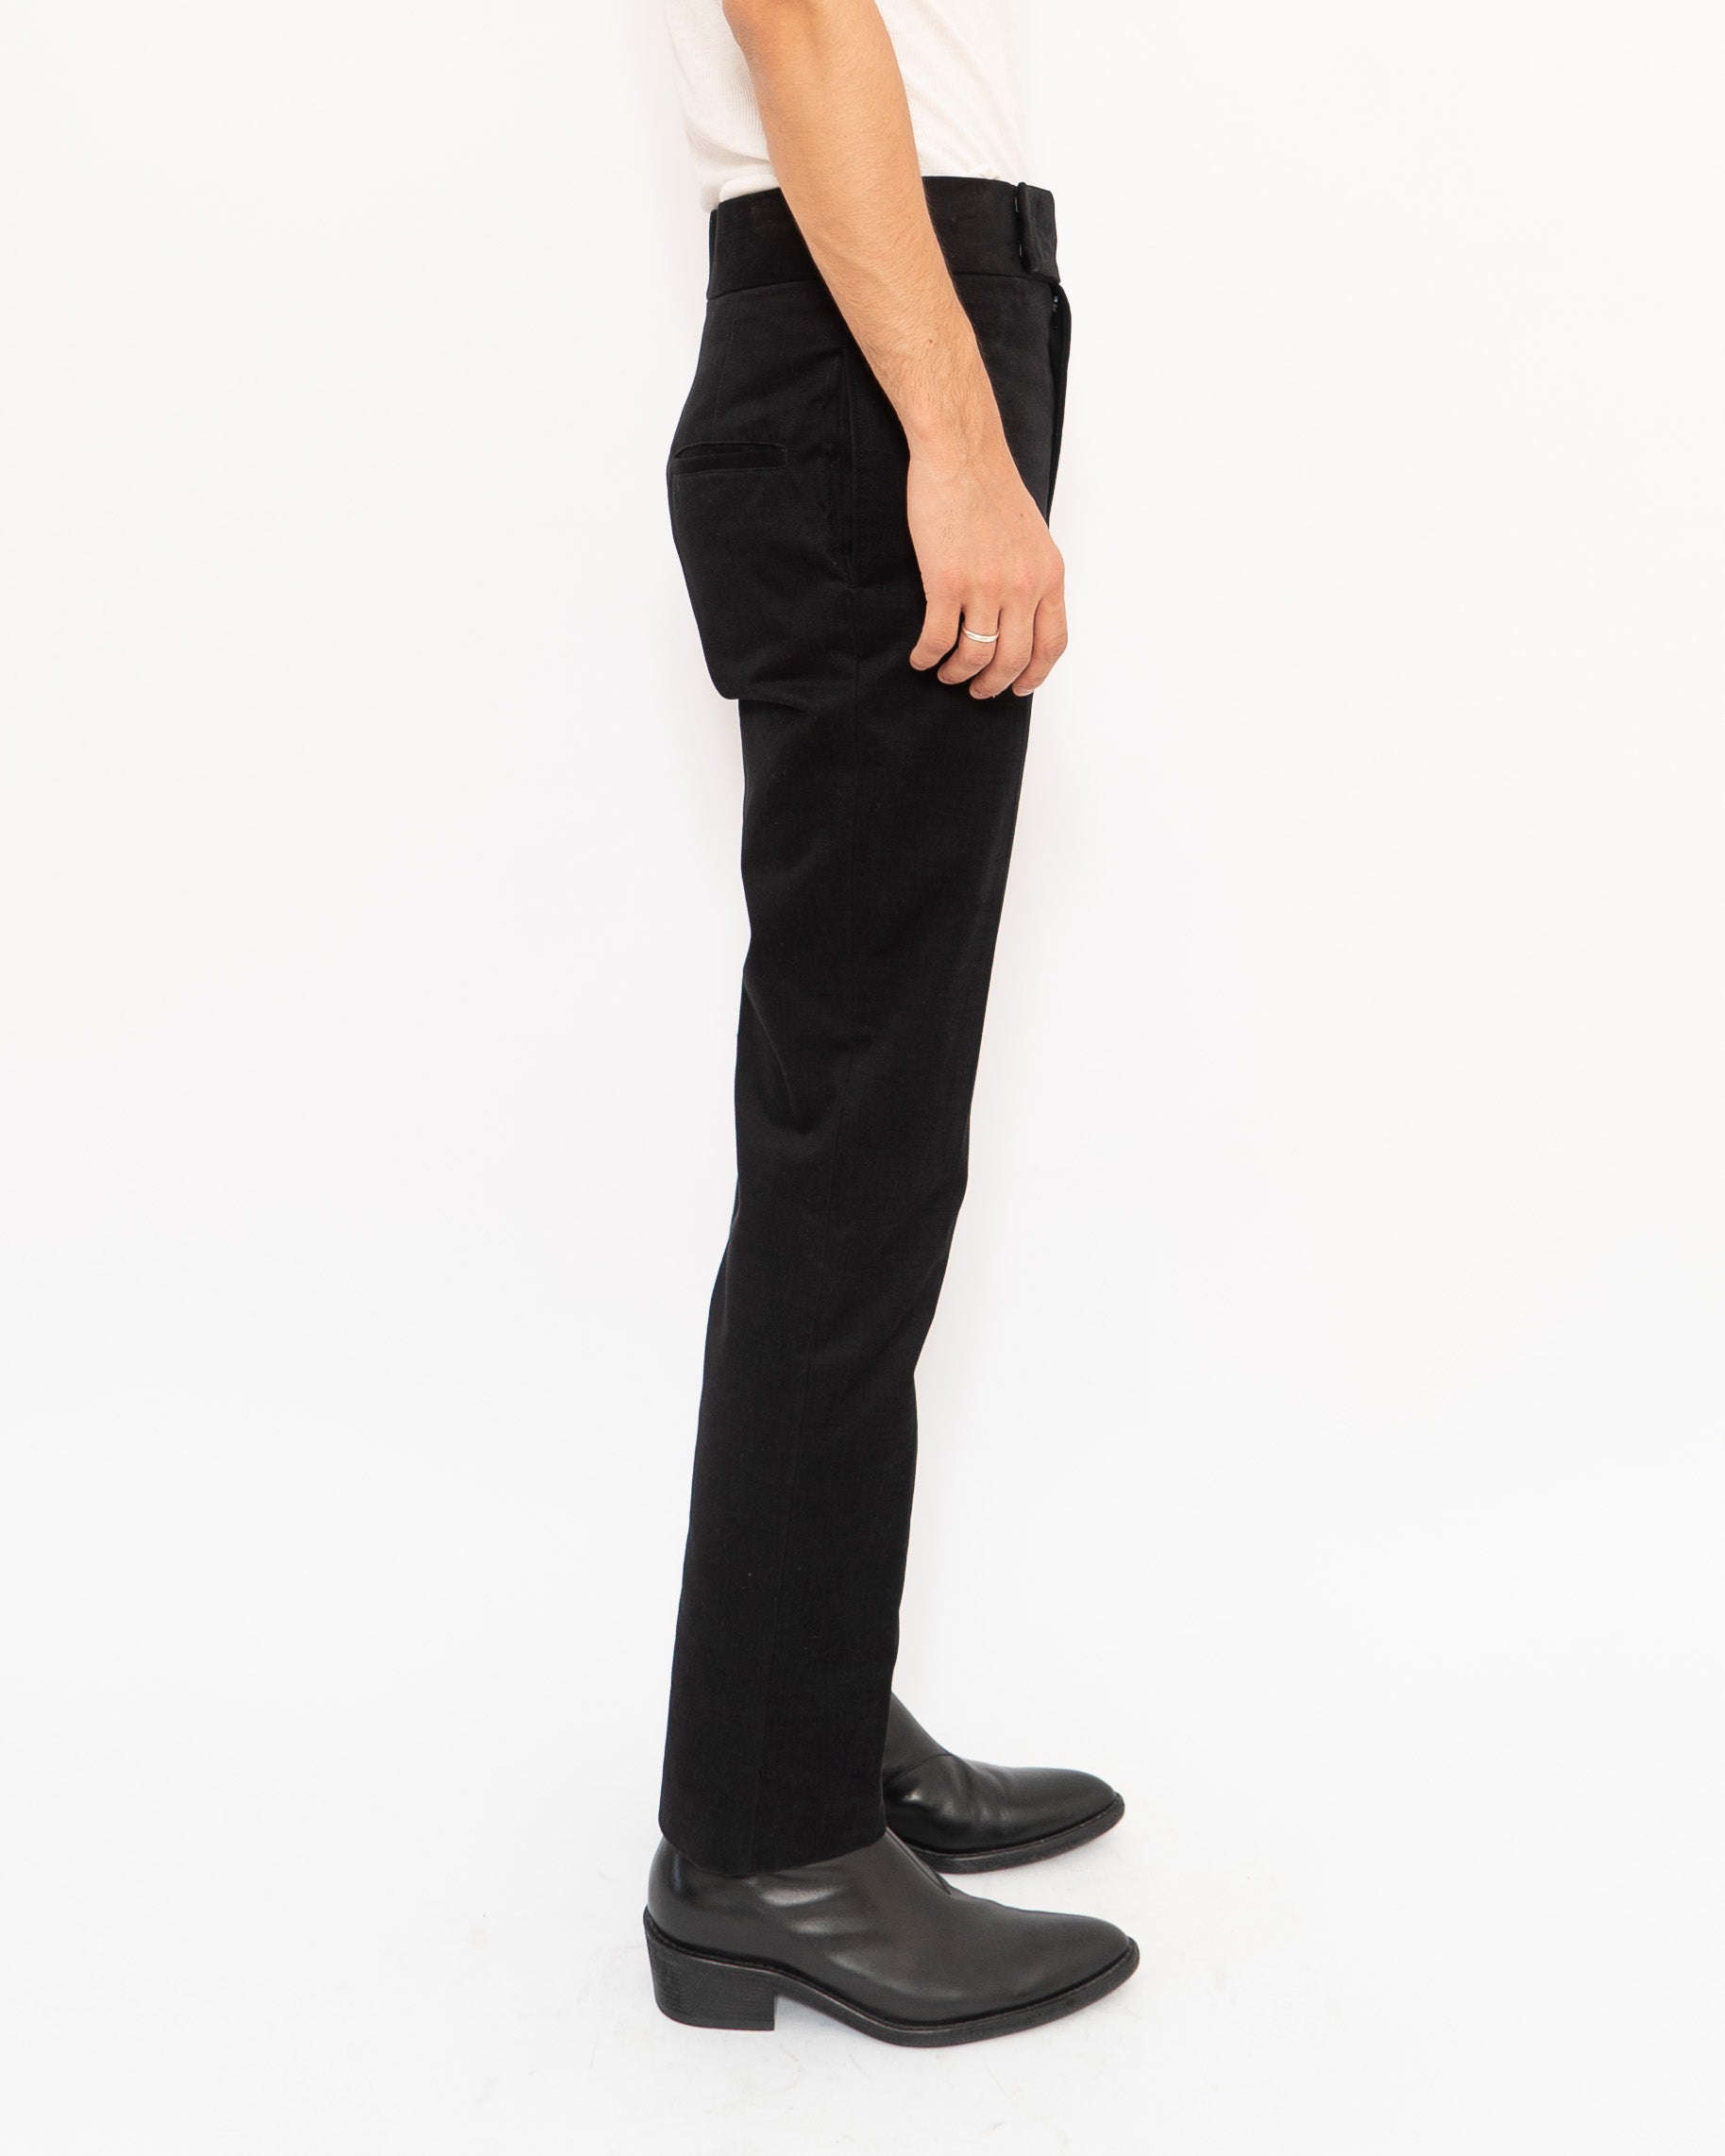 FW20 Beaumont Black Trousers Sample